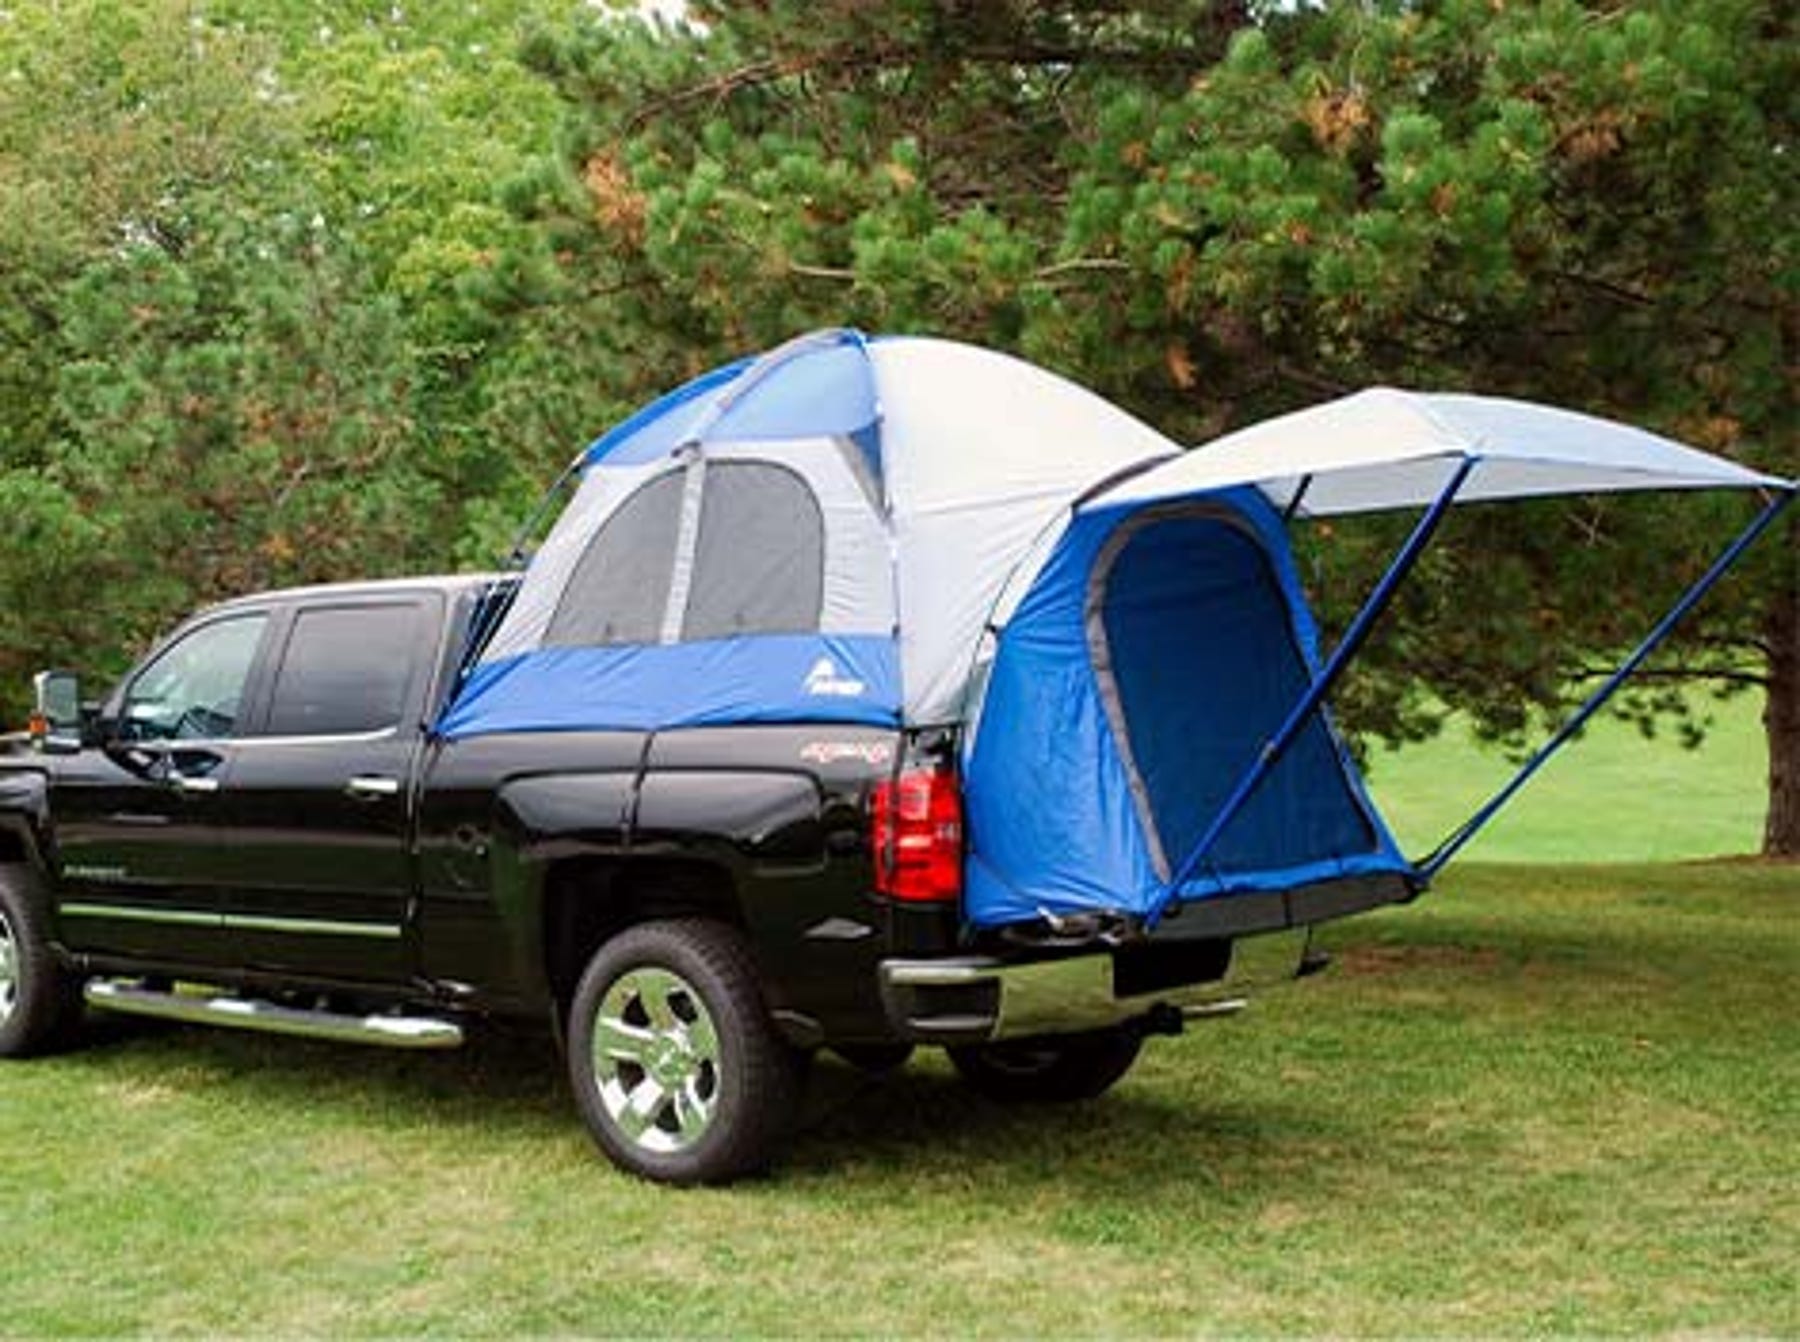 Camping Tents - Dome & Truck tents